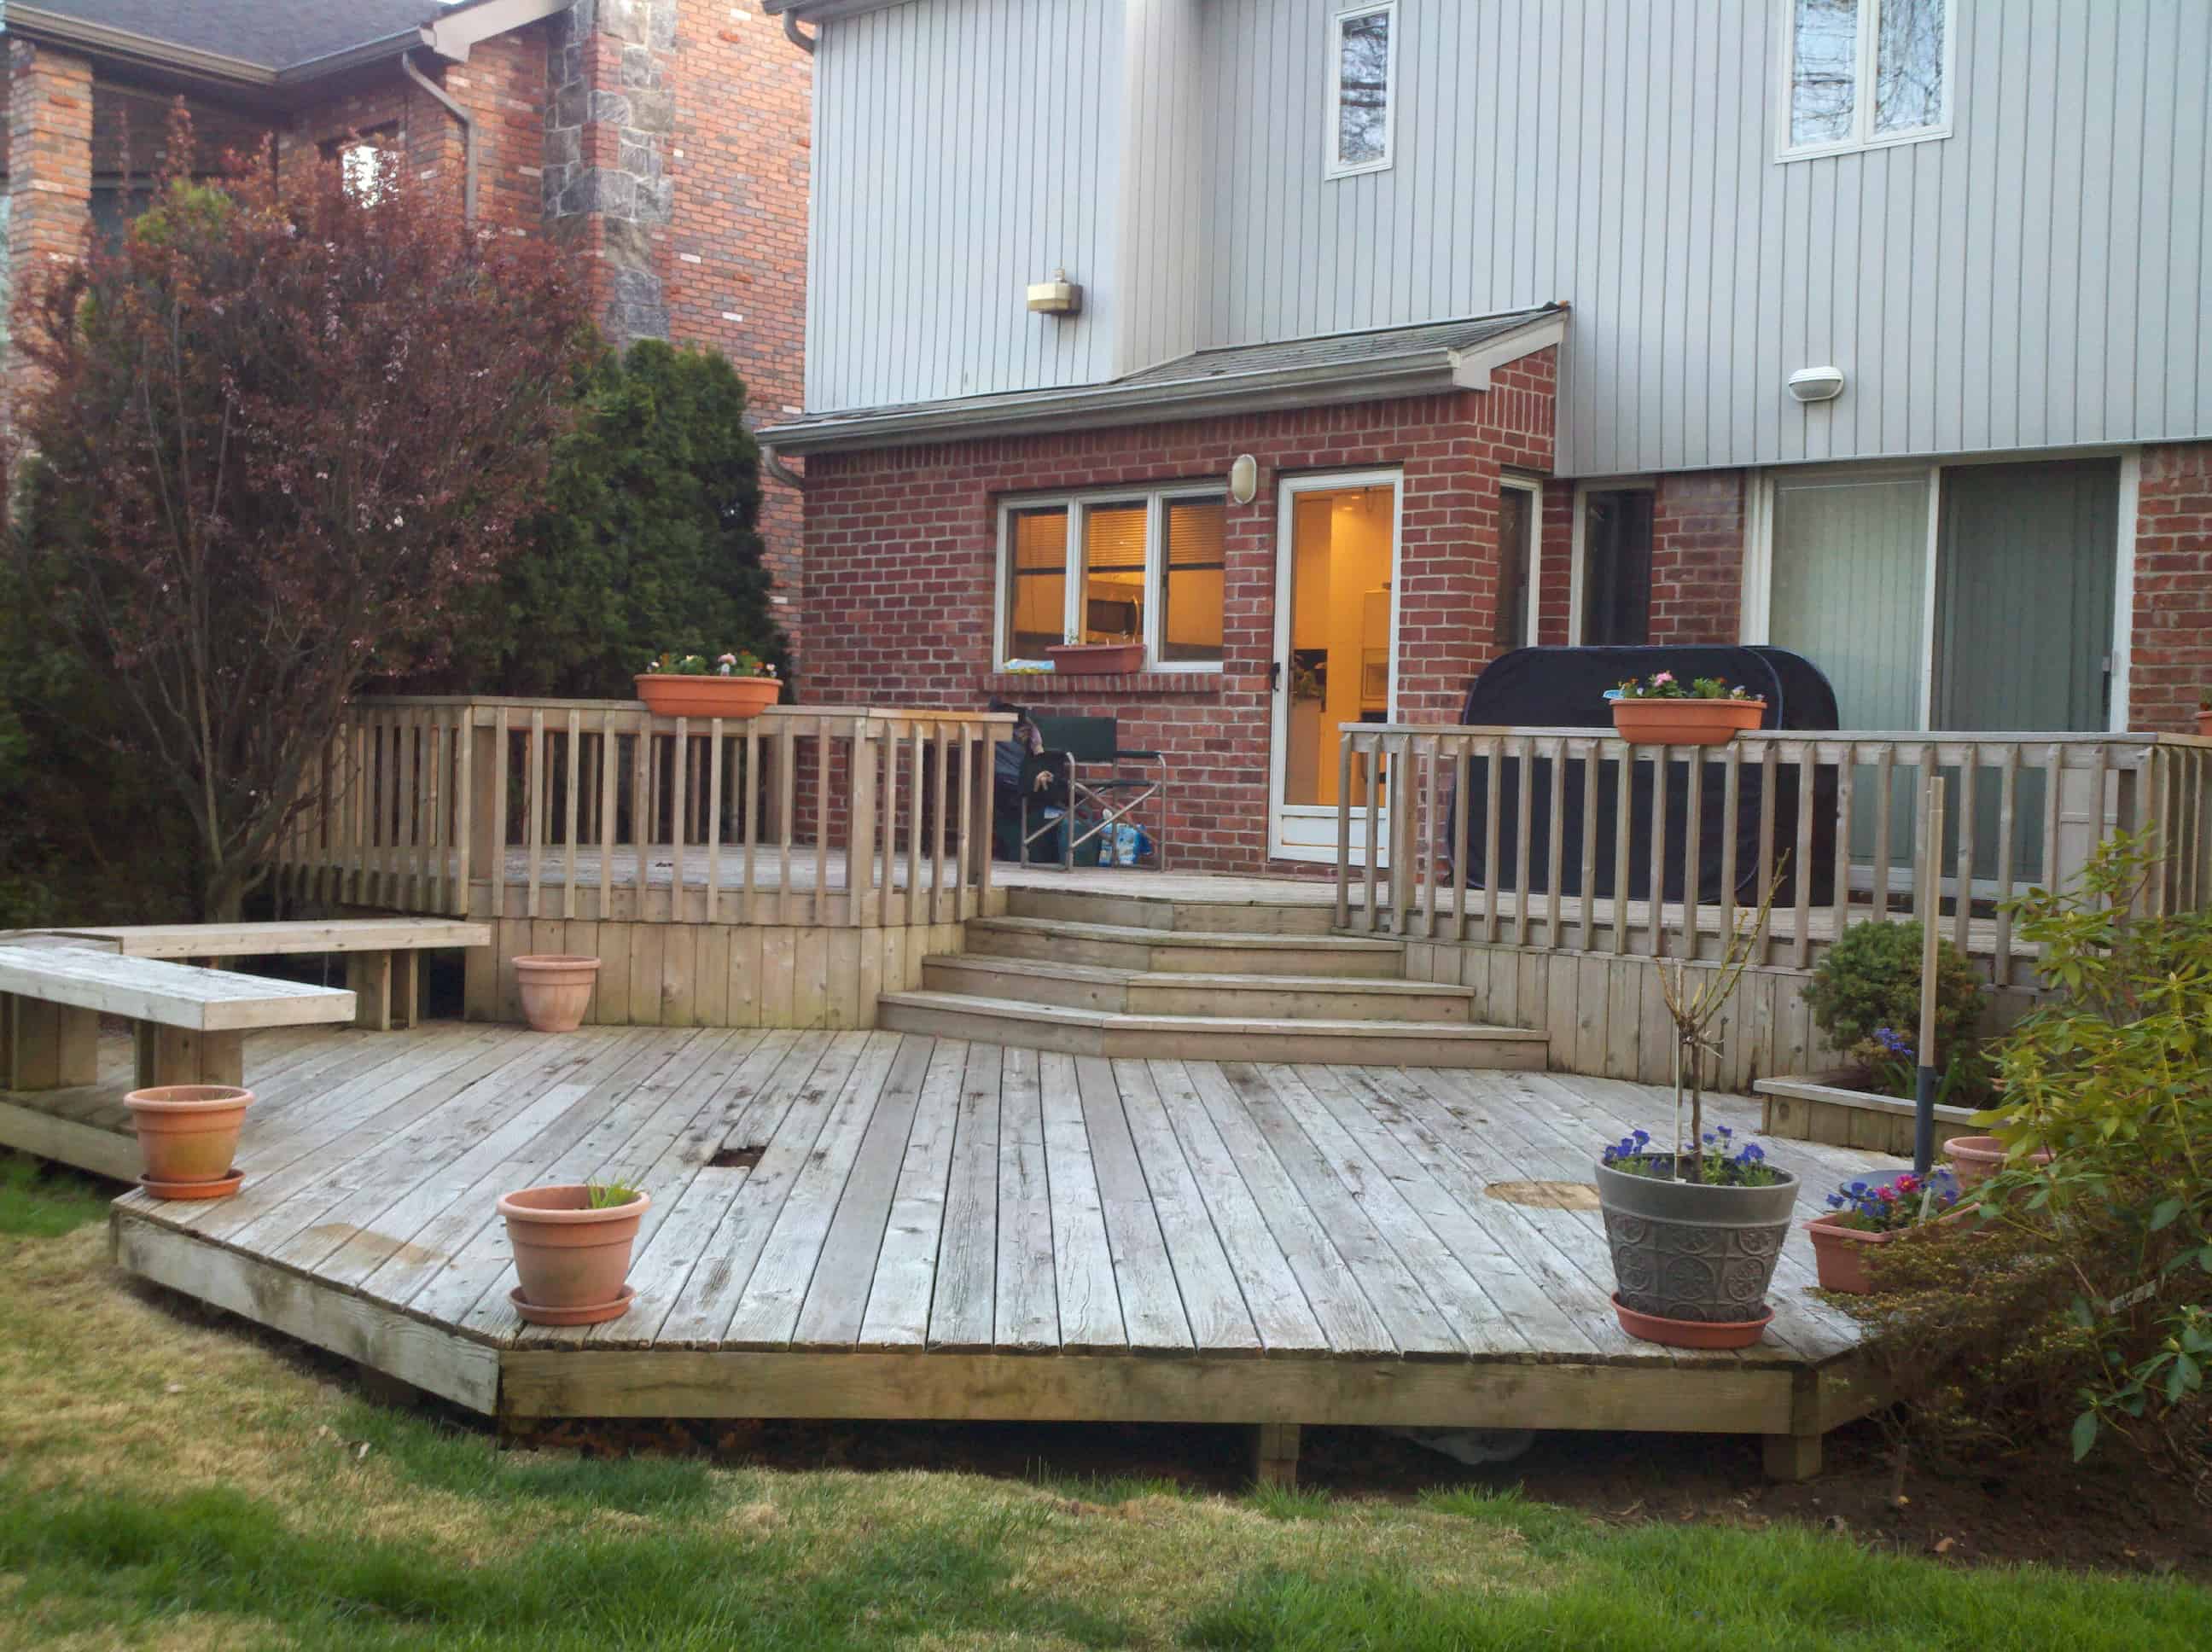 20.SIMPHOME.COM A sloped backyard deck ideas air home products easy and inspiring for backyard deck ideas